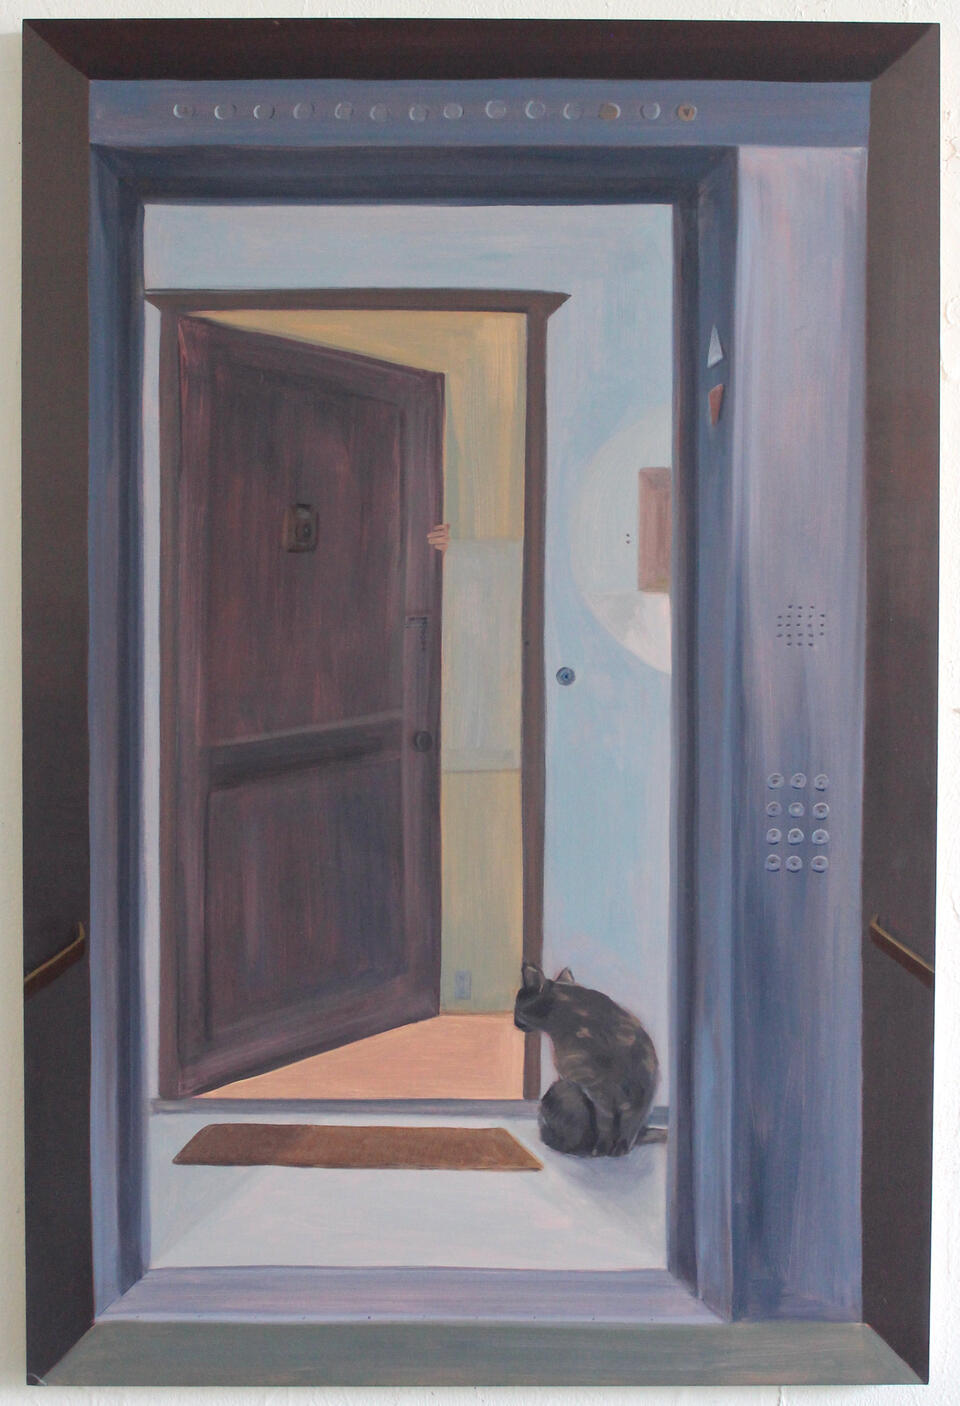 A cat peers into an open apartment door, seen from the inside of an elevator.